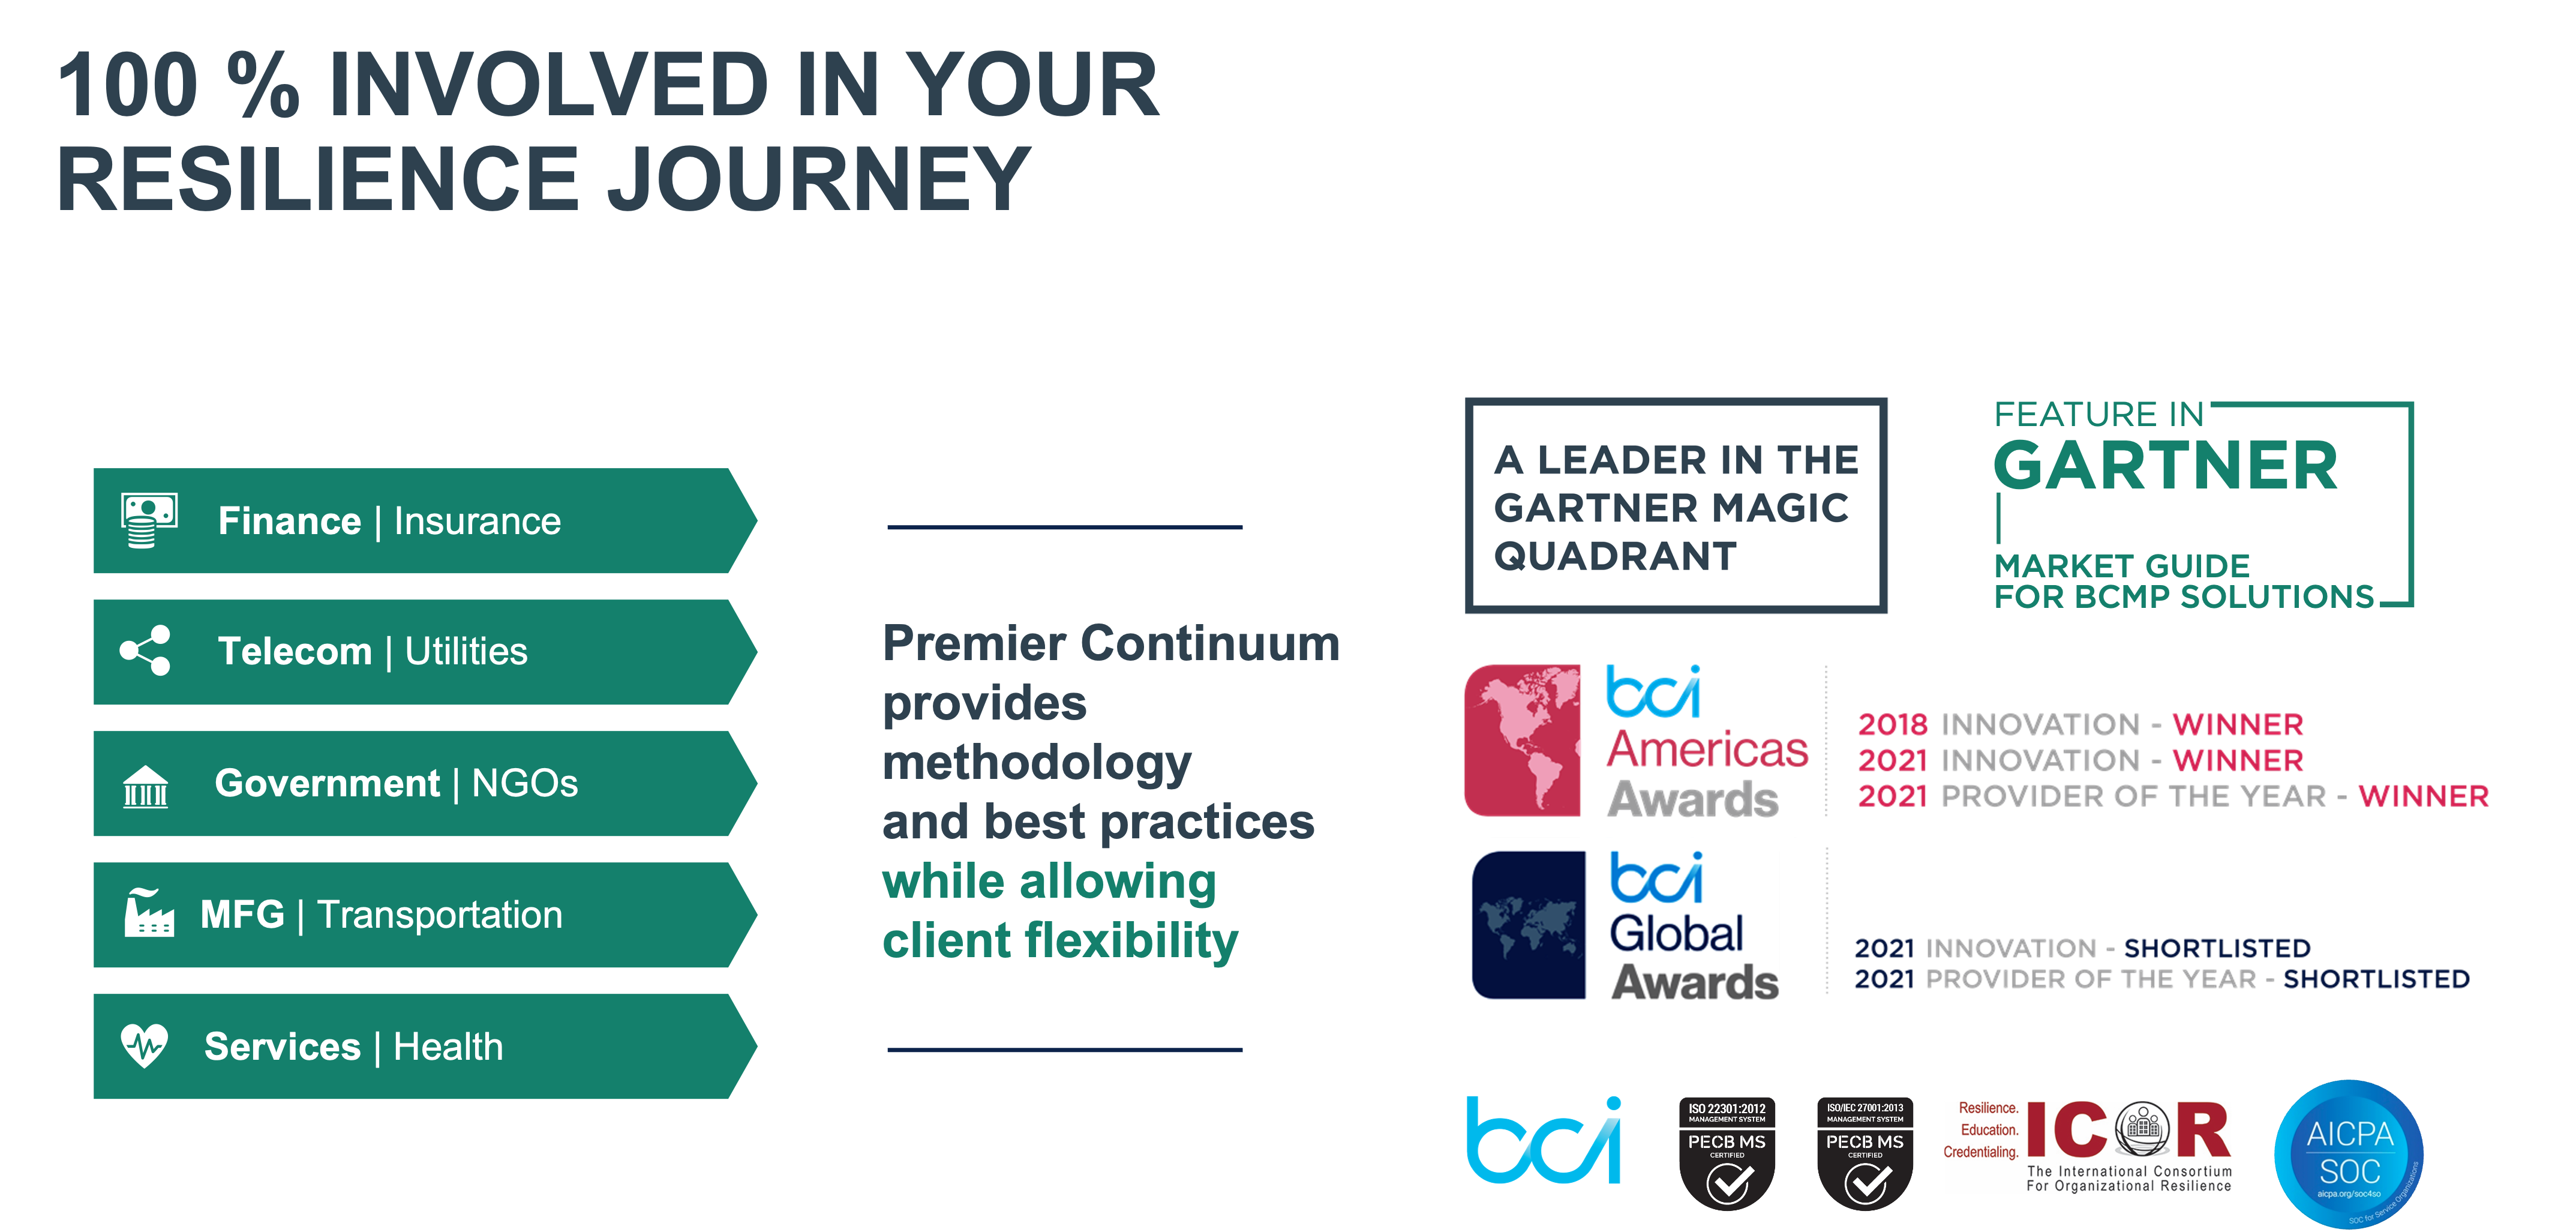 PCI supports its clients throughout the world in each step of the BCM Lifecycle and along their resilience journey.